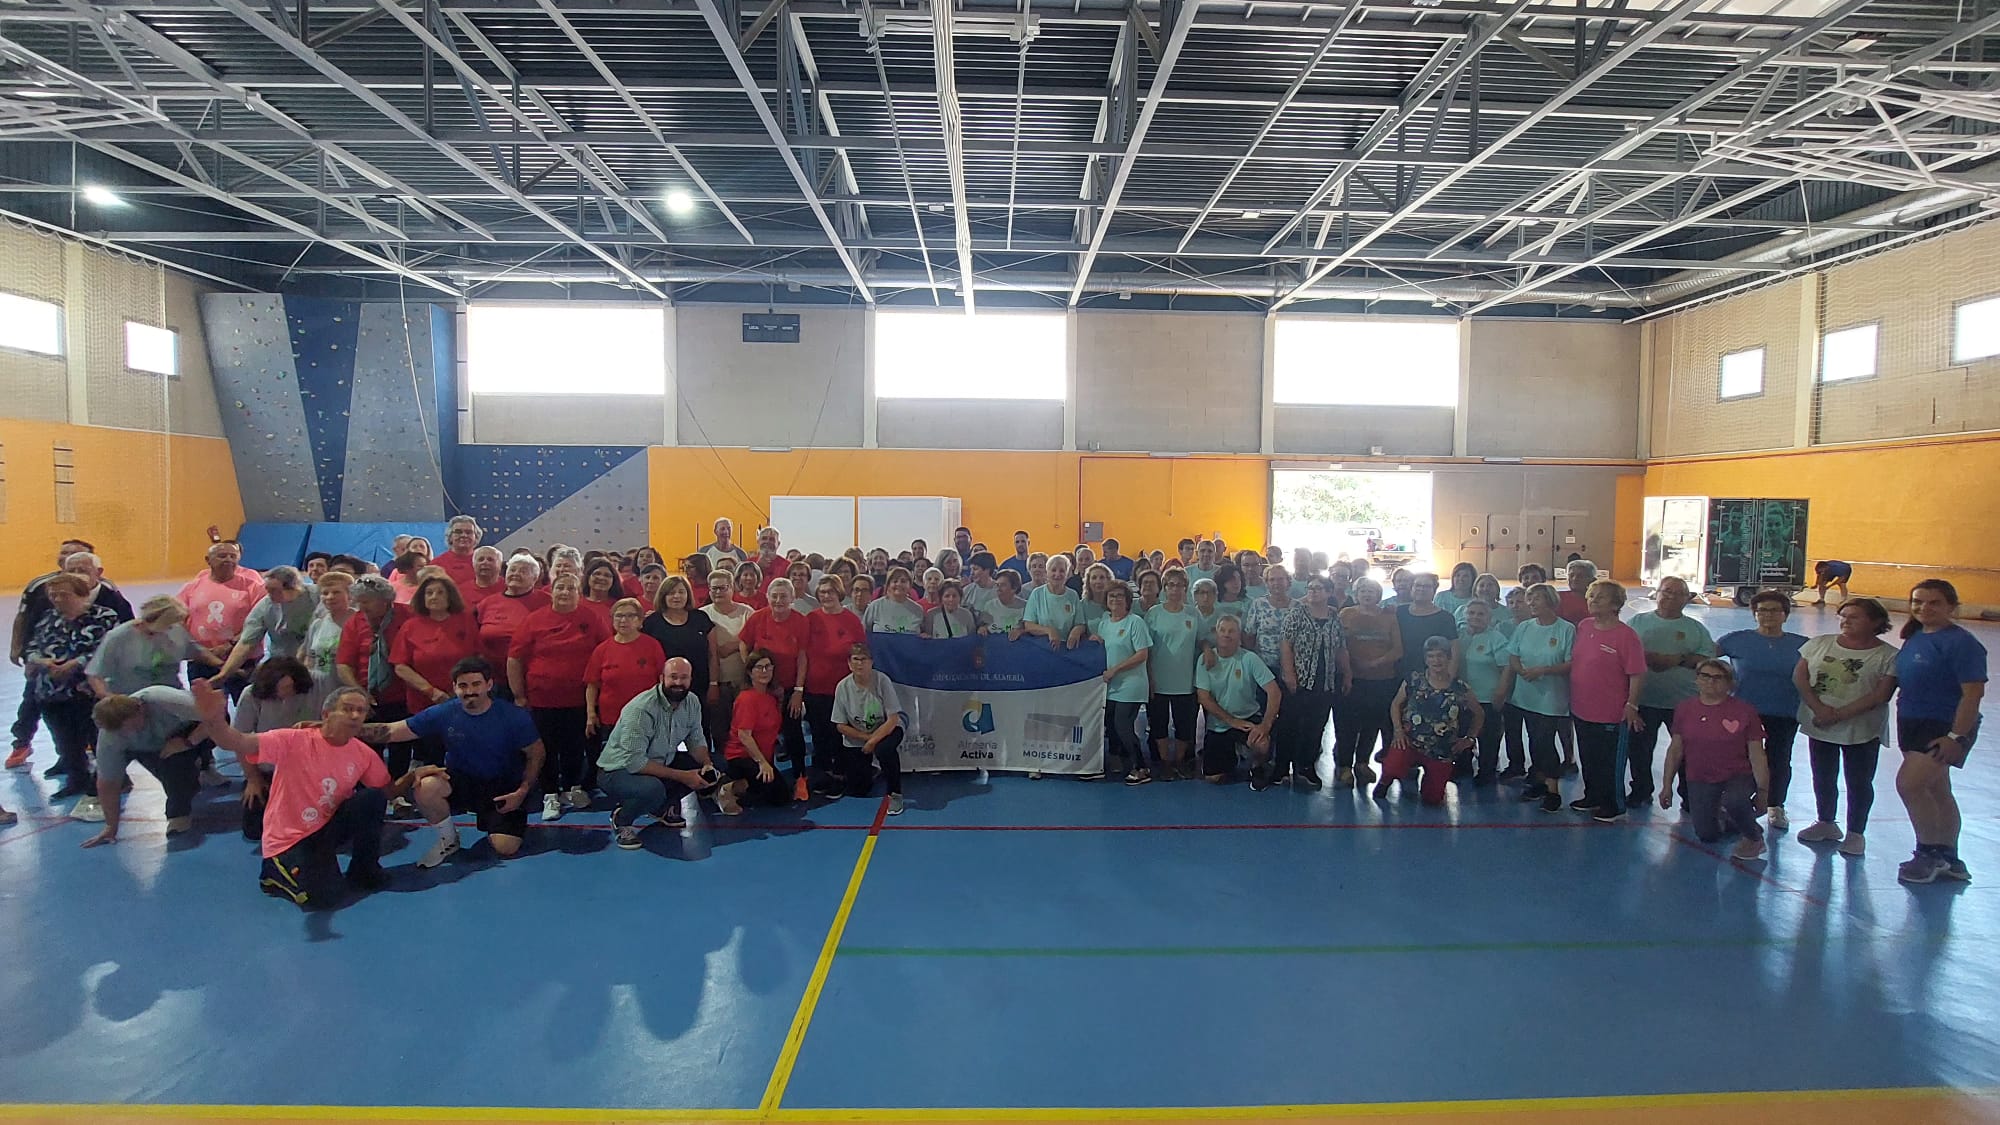 On 28 May, the Mojácar Municipal Sports Pavilion was the setting for the second Sport and Health Meeting, an initiative organised by the Almería Provincial Council and Mojácar Town Council